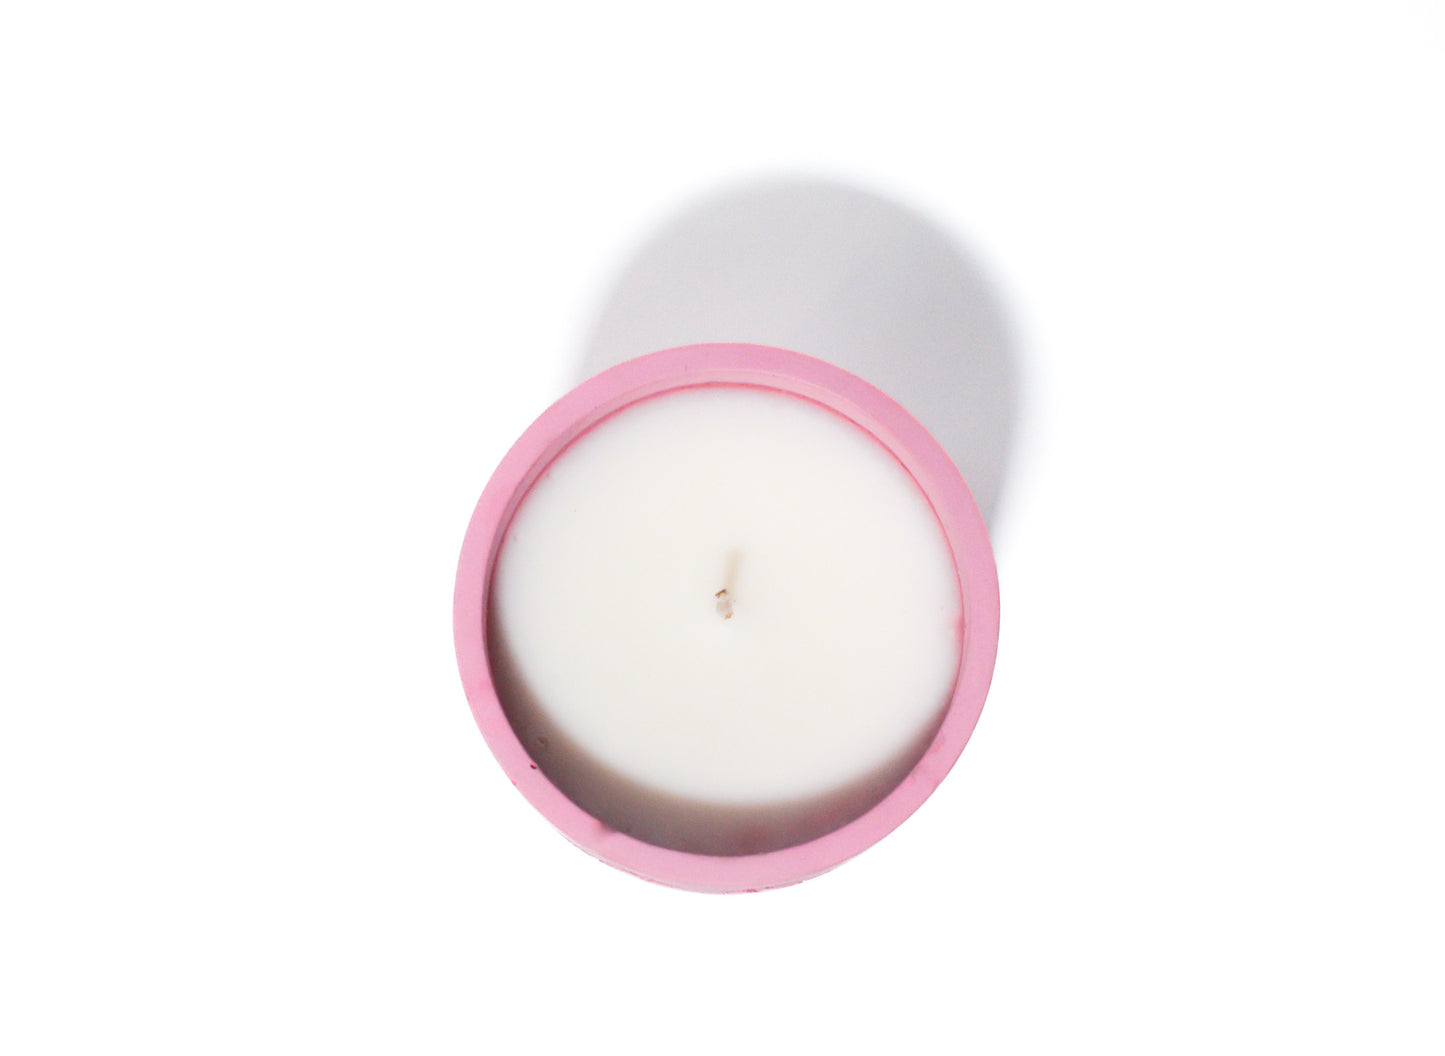 8 oz Concrete Pink Beach Candle, Inspired by the pink sand beaches of Barbados, fragrance tropical, fruity, floral and sandy, made with coconut wax, luxury candle, vegan candle, TropaCabana, handmade candle